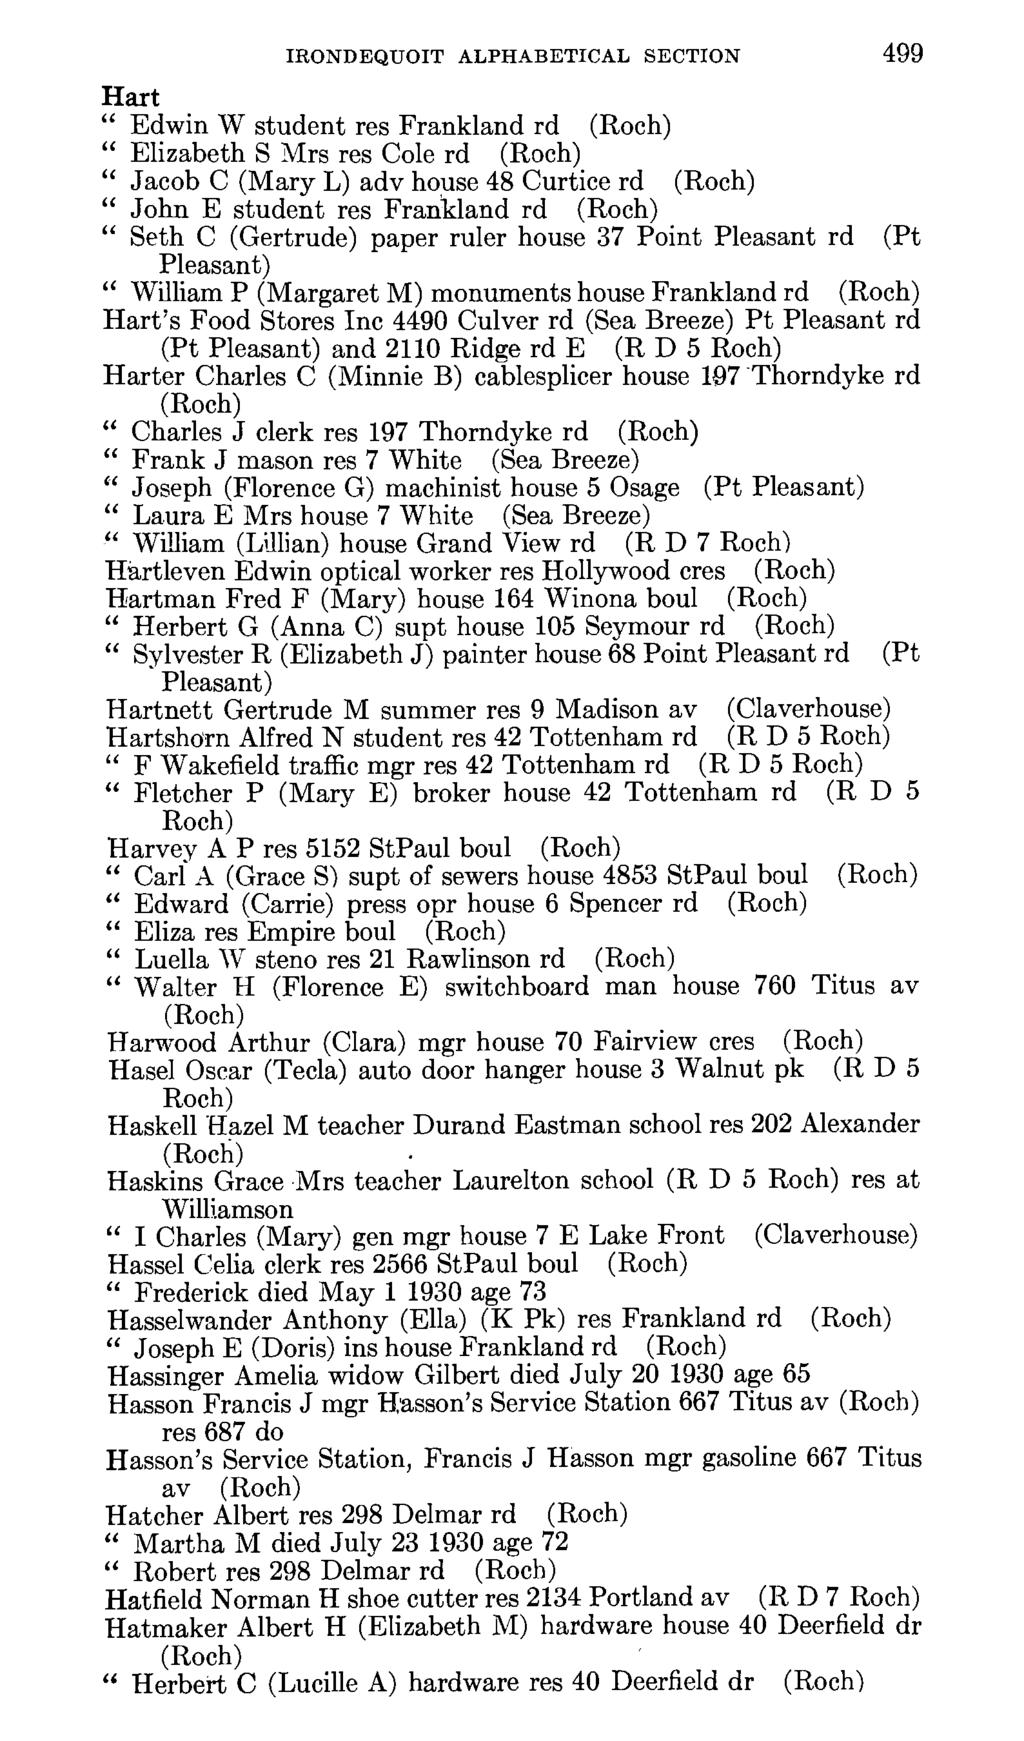 IRONDEQUOIT ALPHABETICAL SECTION 499 Hart Edwin W student res Frankland rd Elizabeth S Mrs res Cole rd Jacob C (Mary L) adv house 48 Curtice rd John E student res Frankland rd Seth C (Gertrude) paper